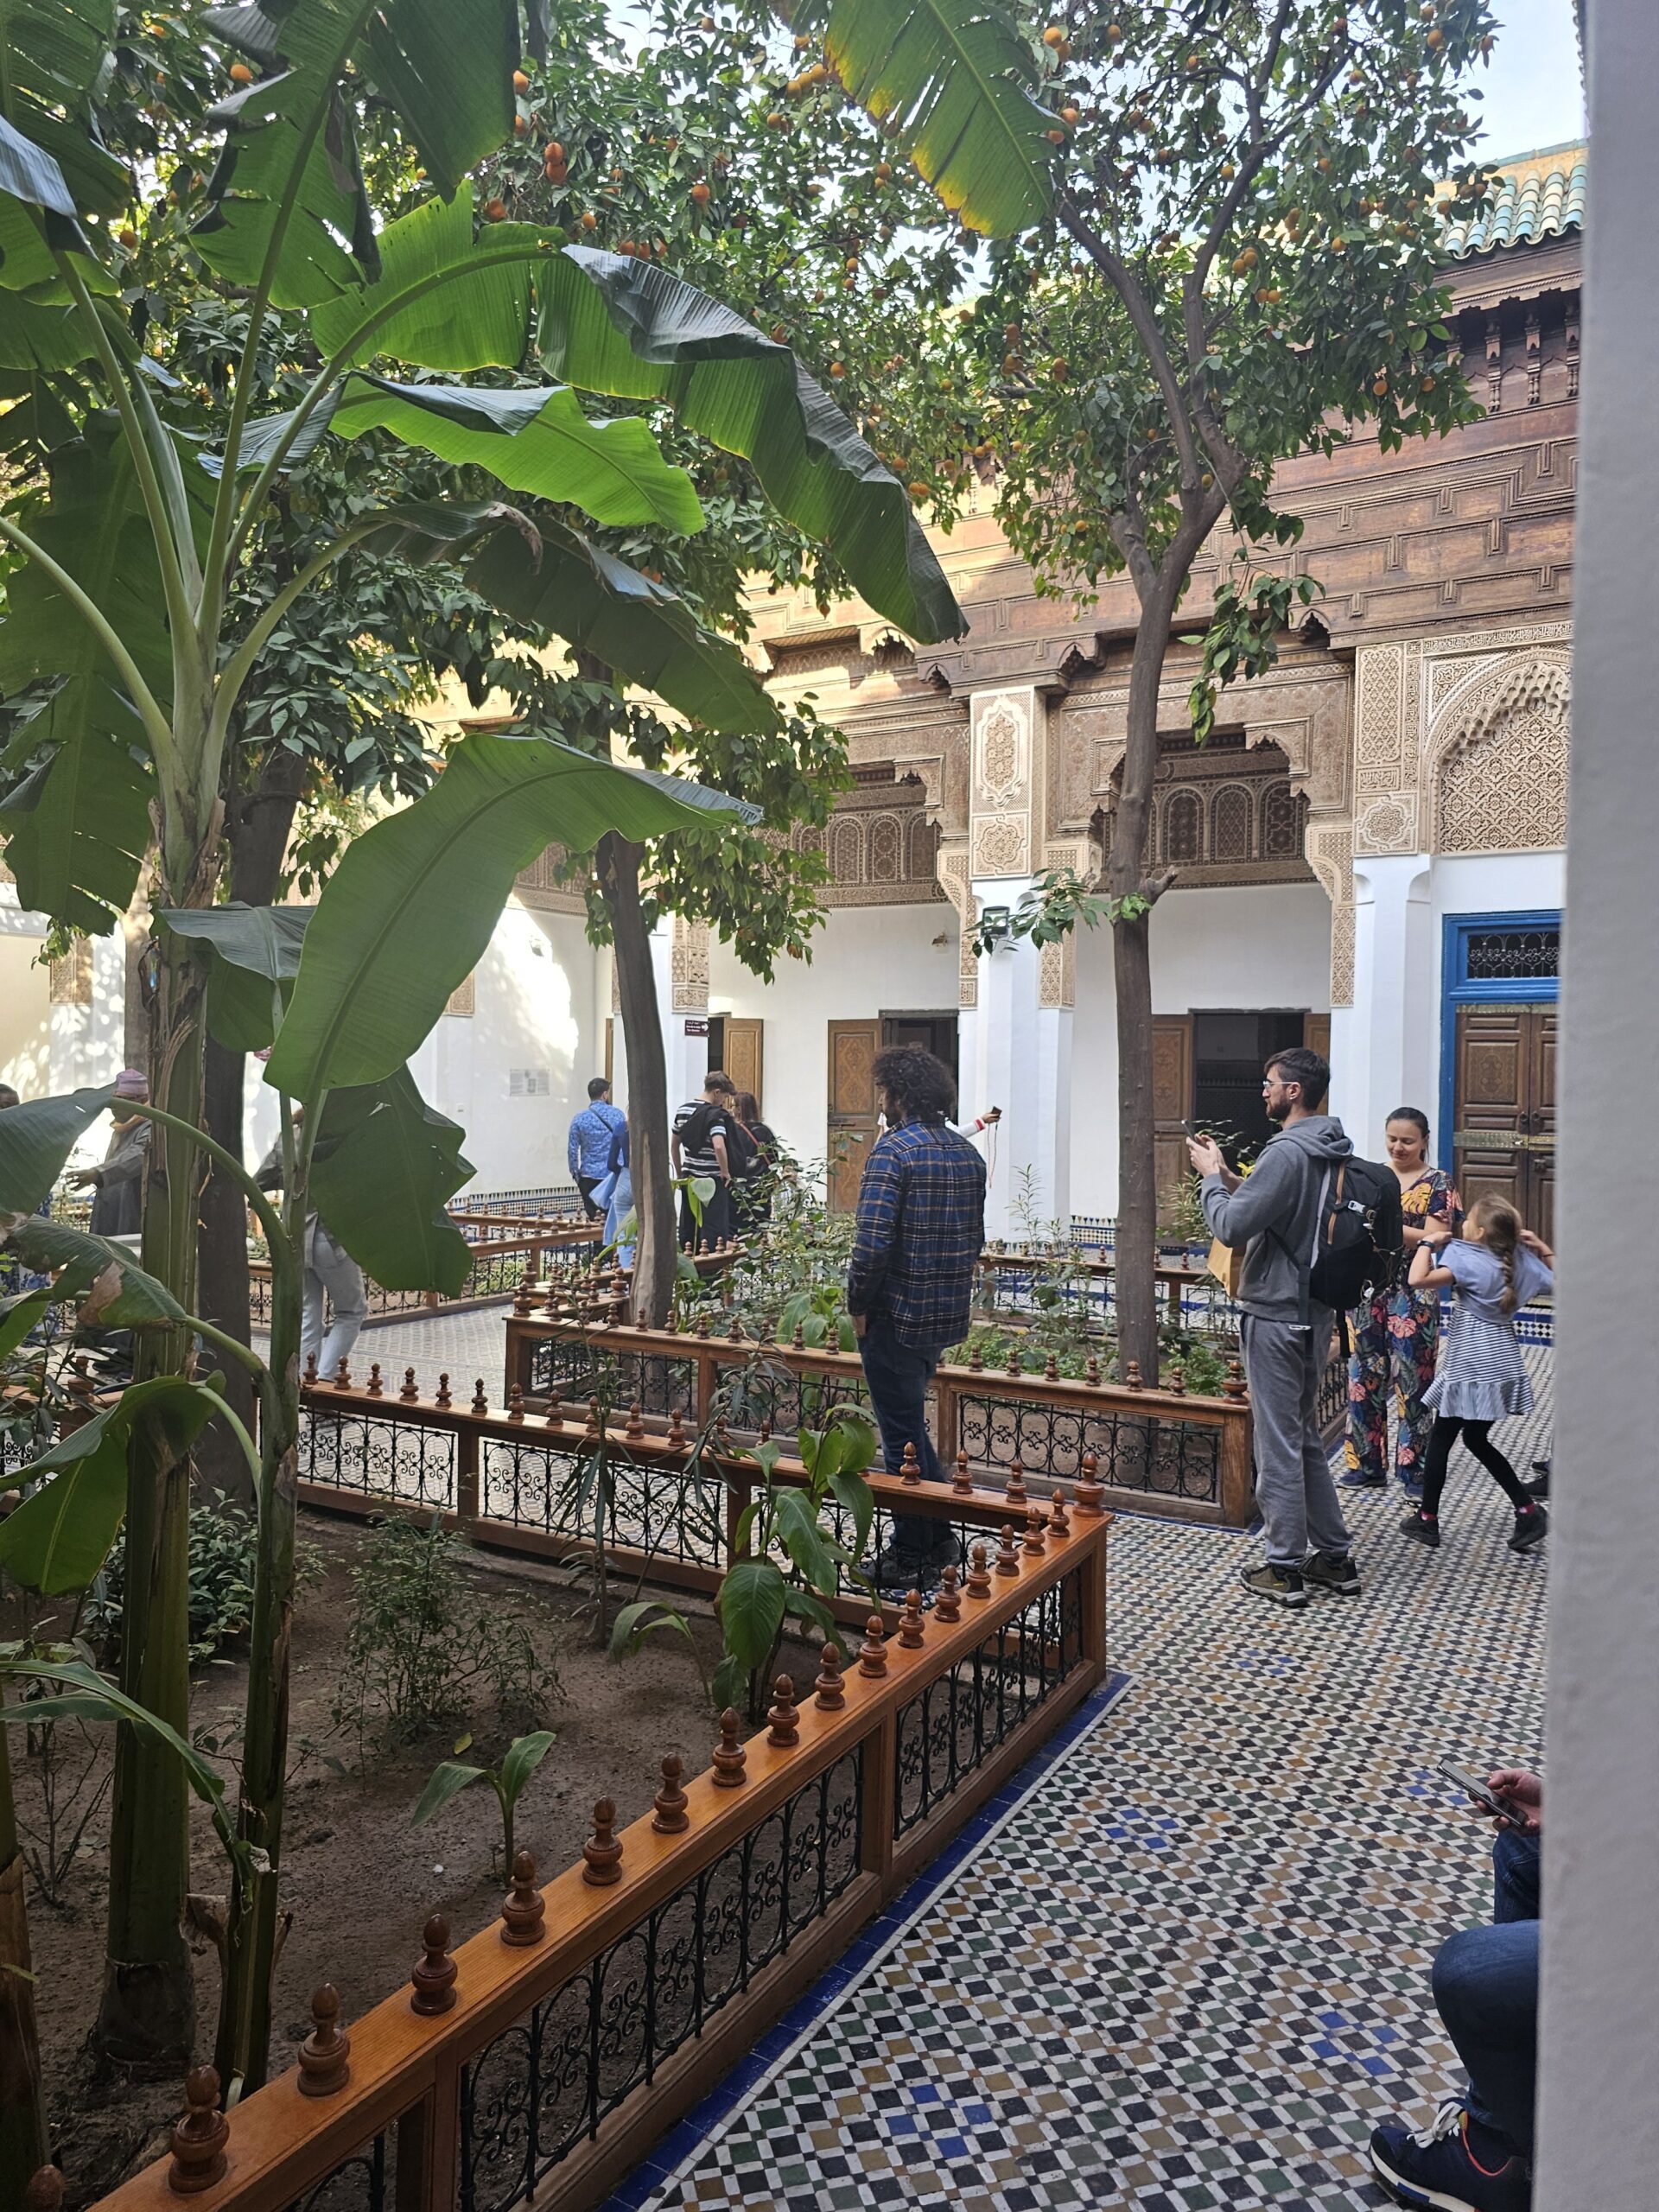 Courtyard of Bahia Palace. Image by 360onhistory showing people walking around the plant beds that have trees.